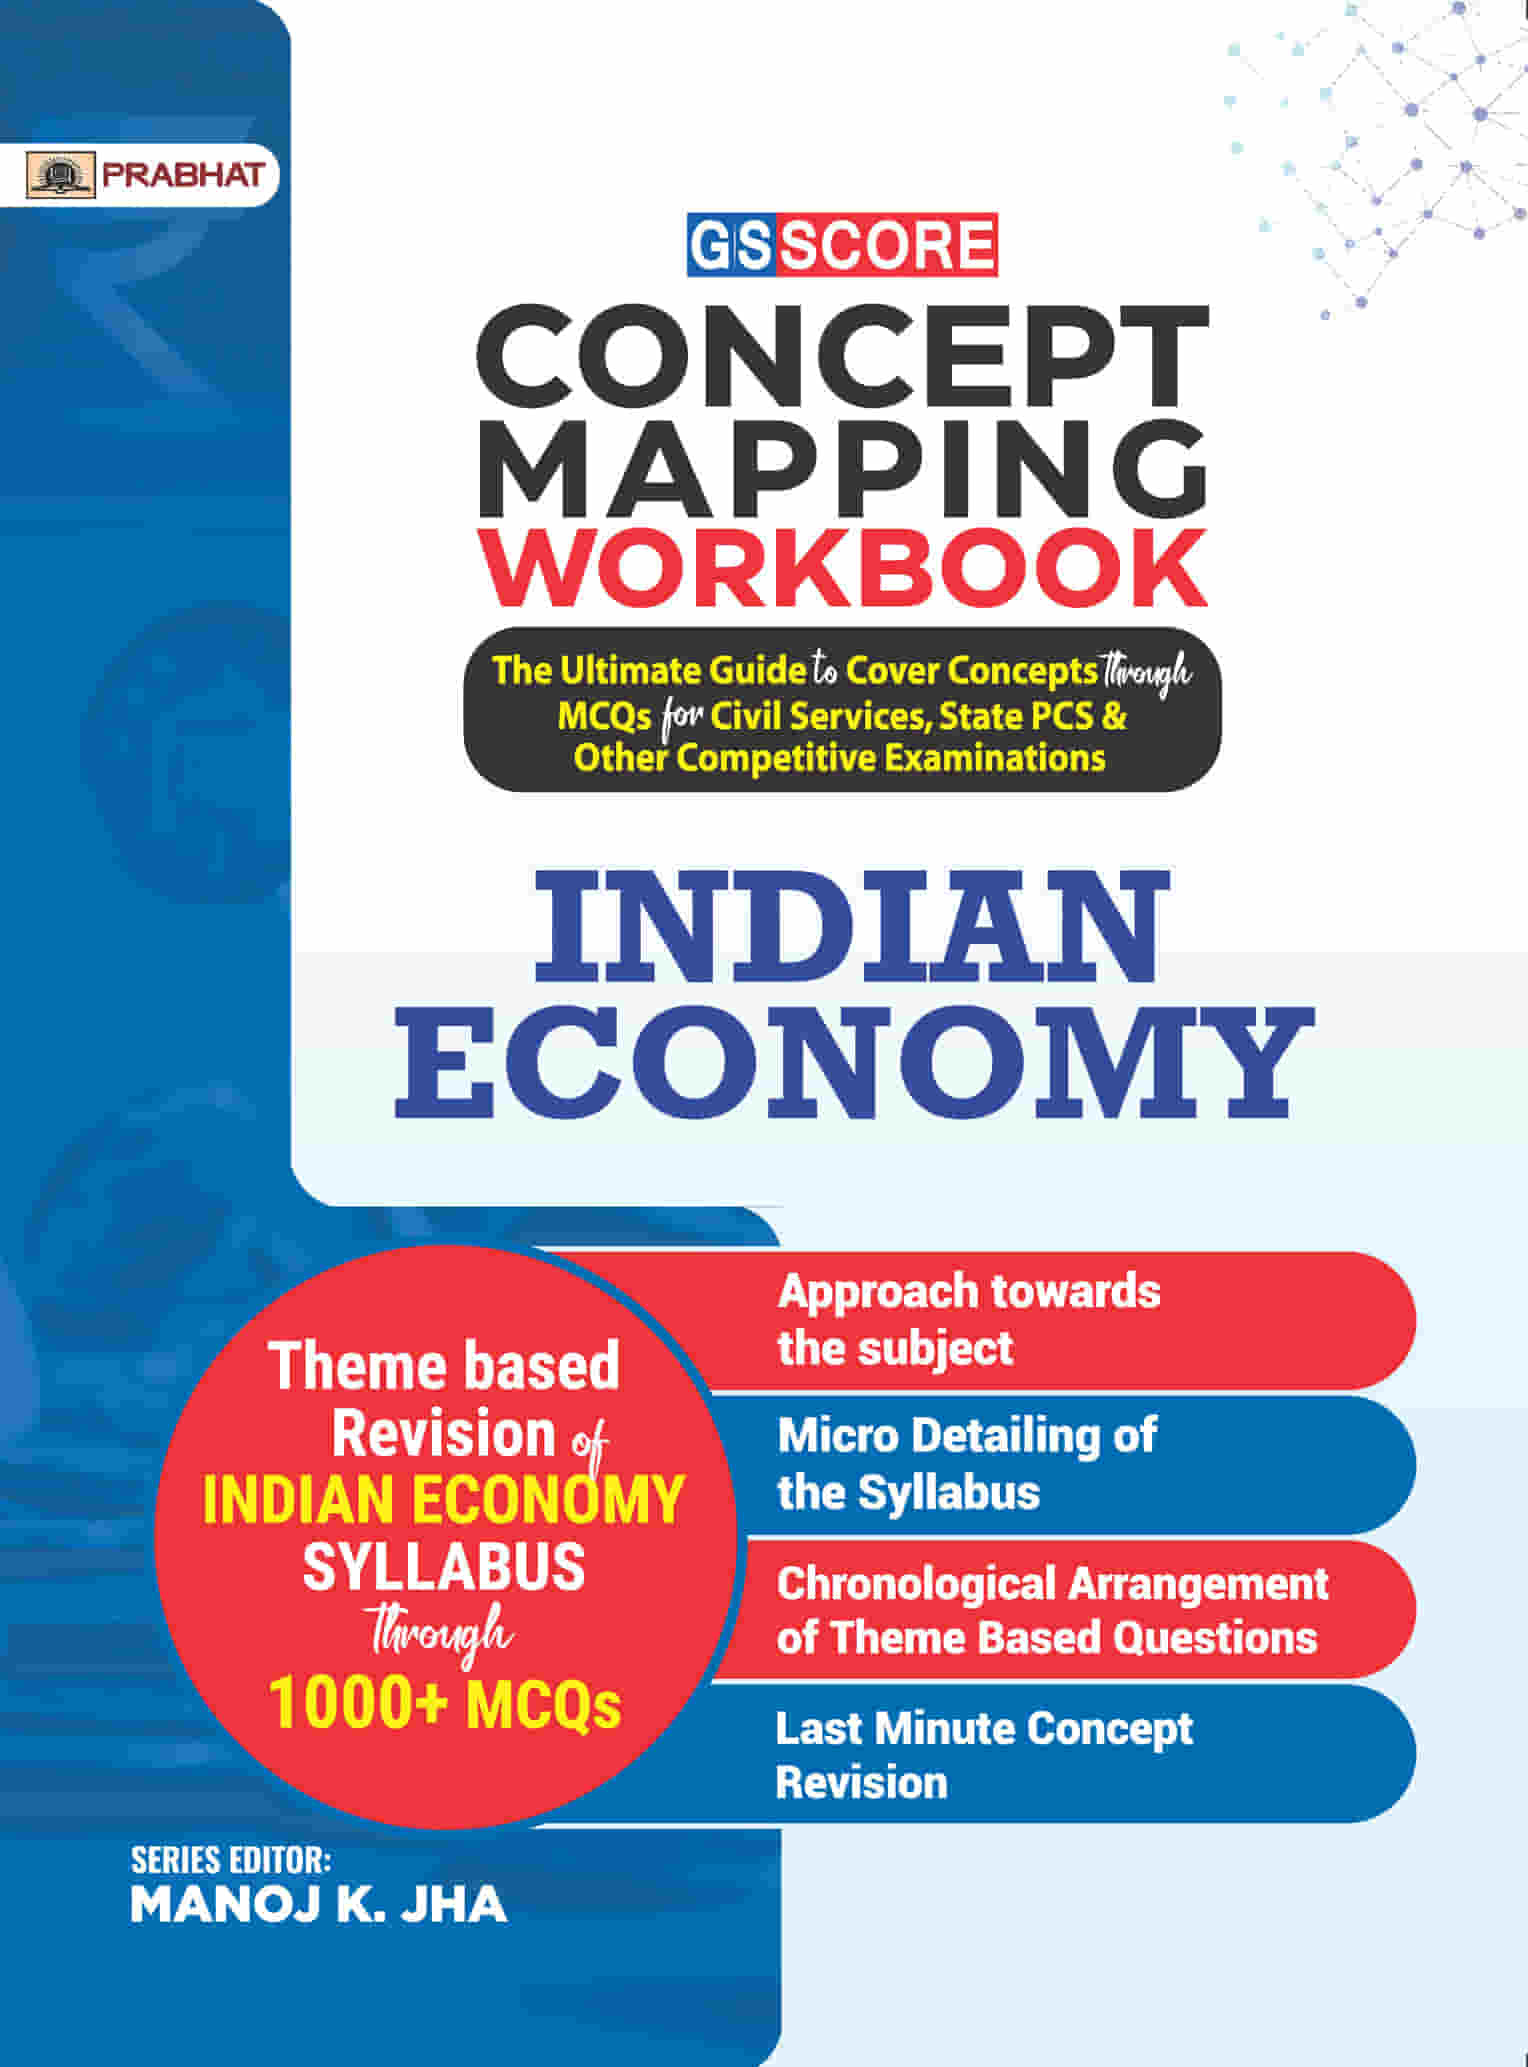 GS SCORE Concept Mapping Workbook Indian Economy: the Ultimate Guide to Cover Concepts through MCQs for Civil Services, State PCS & Other Competitive Examinations 